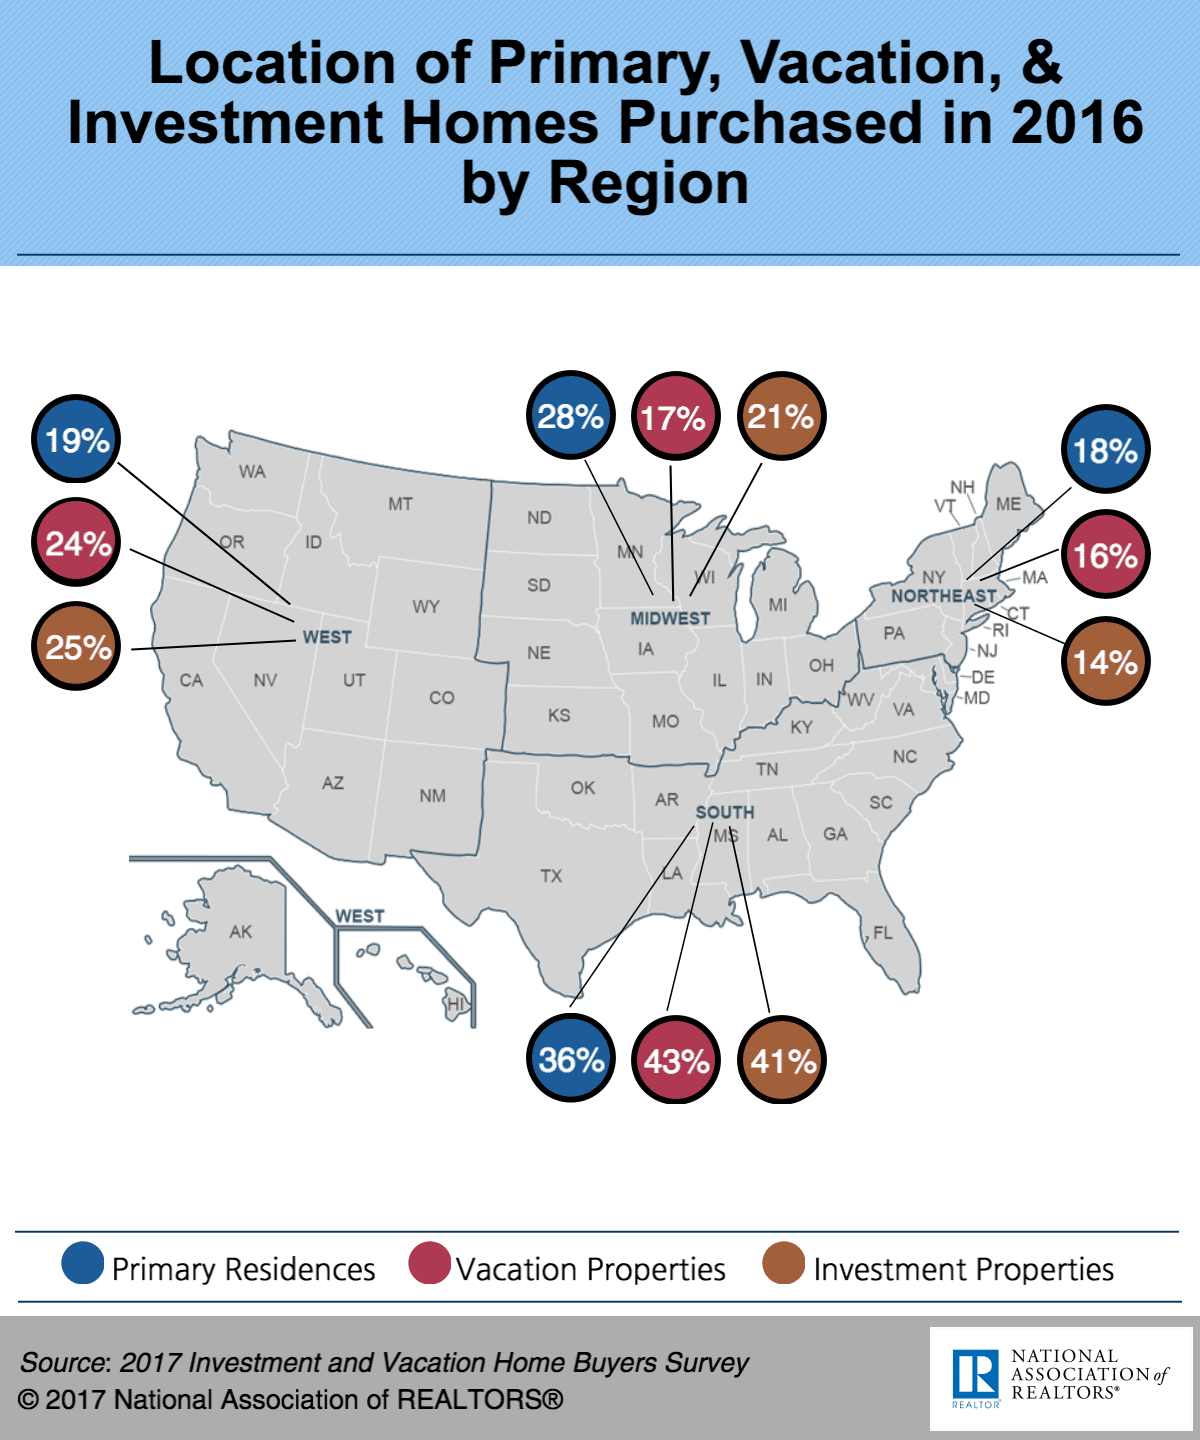 2016 primary vacation investment homes by region infographic 04 17 2017 1200w 1440h 1